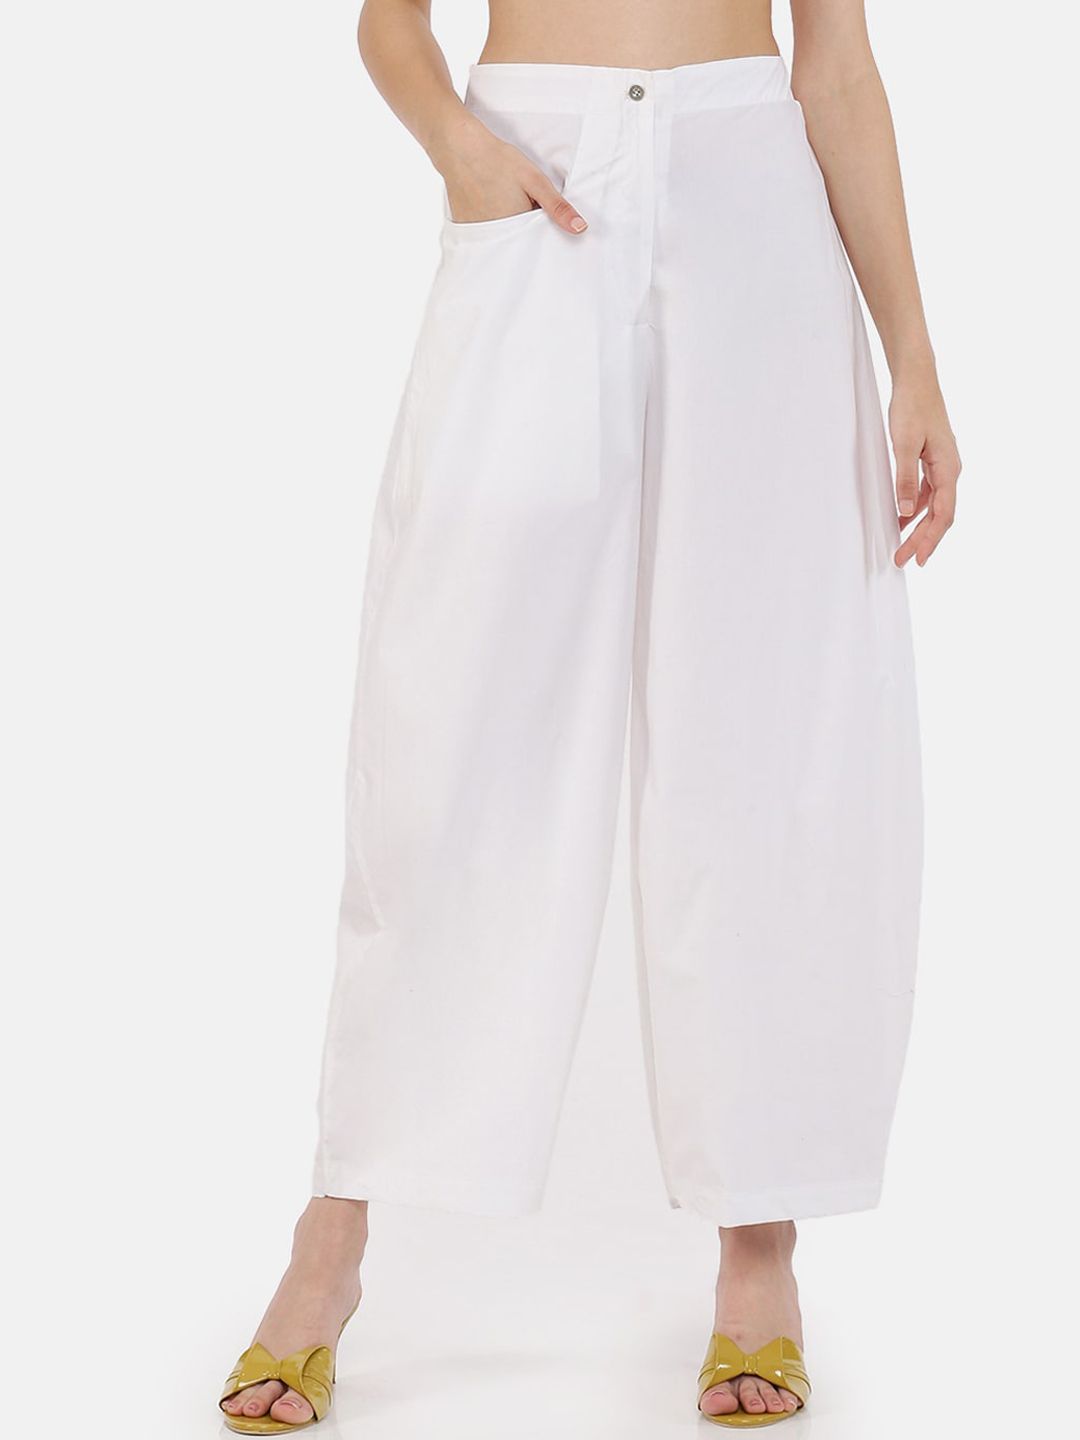 GRASS by Gitika Goyal Women White Classic Loose Fit High-Rise Culottes Trousers Price in India